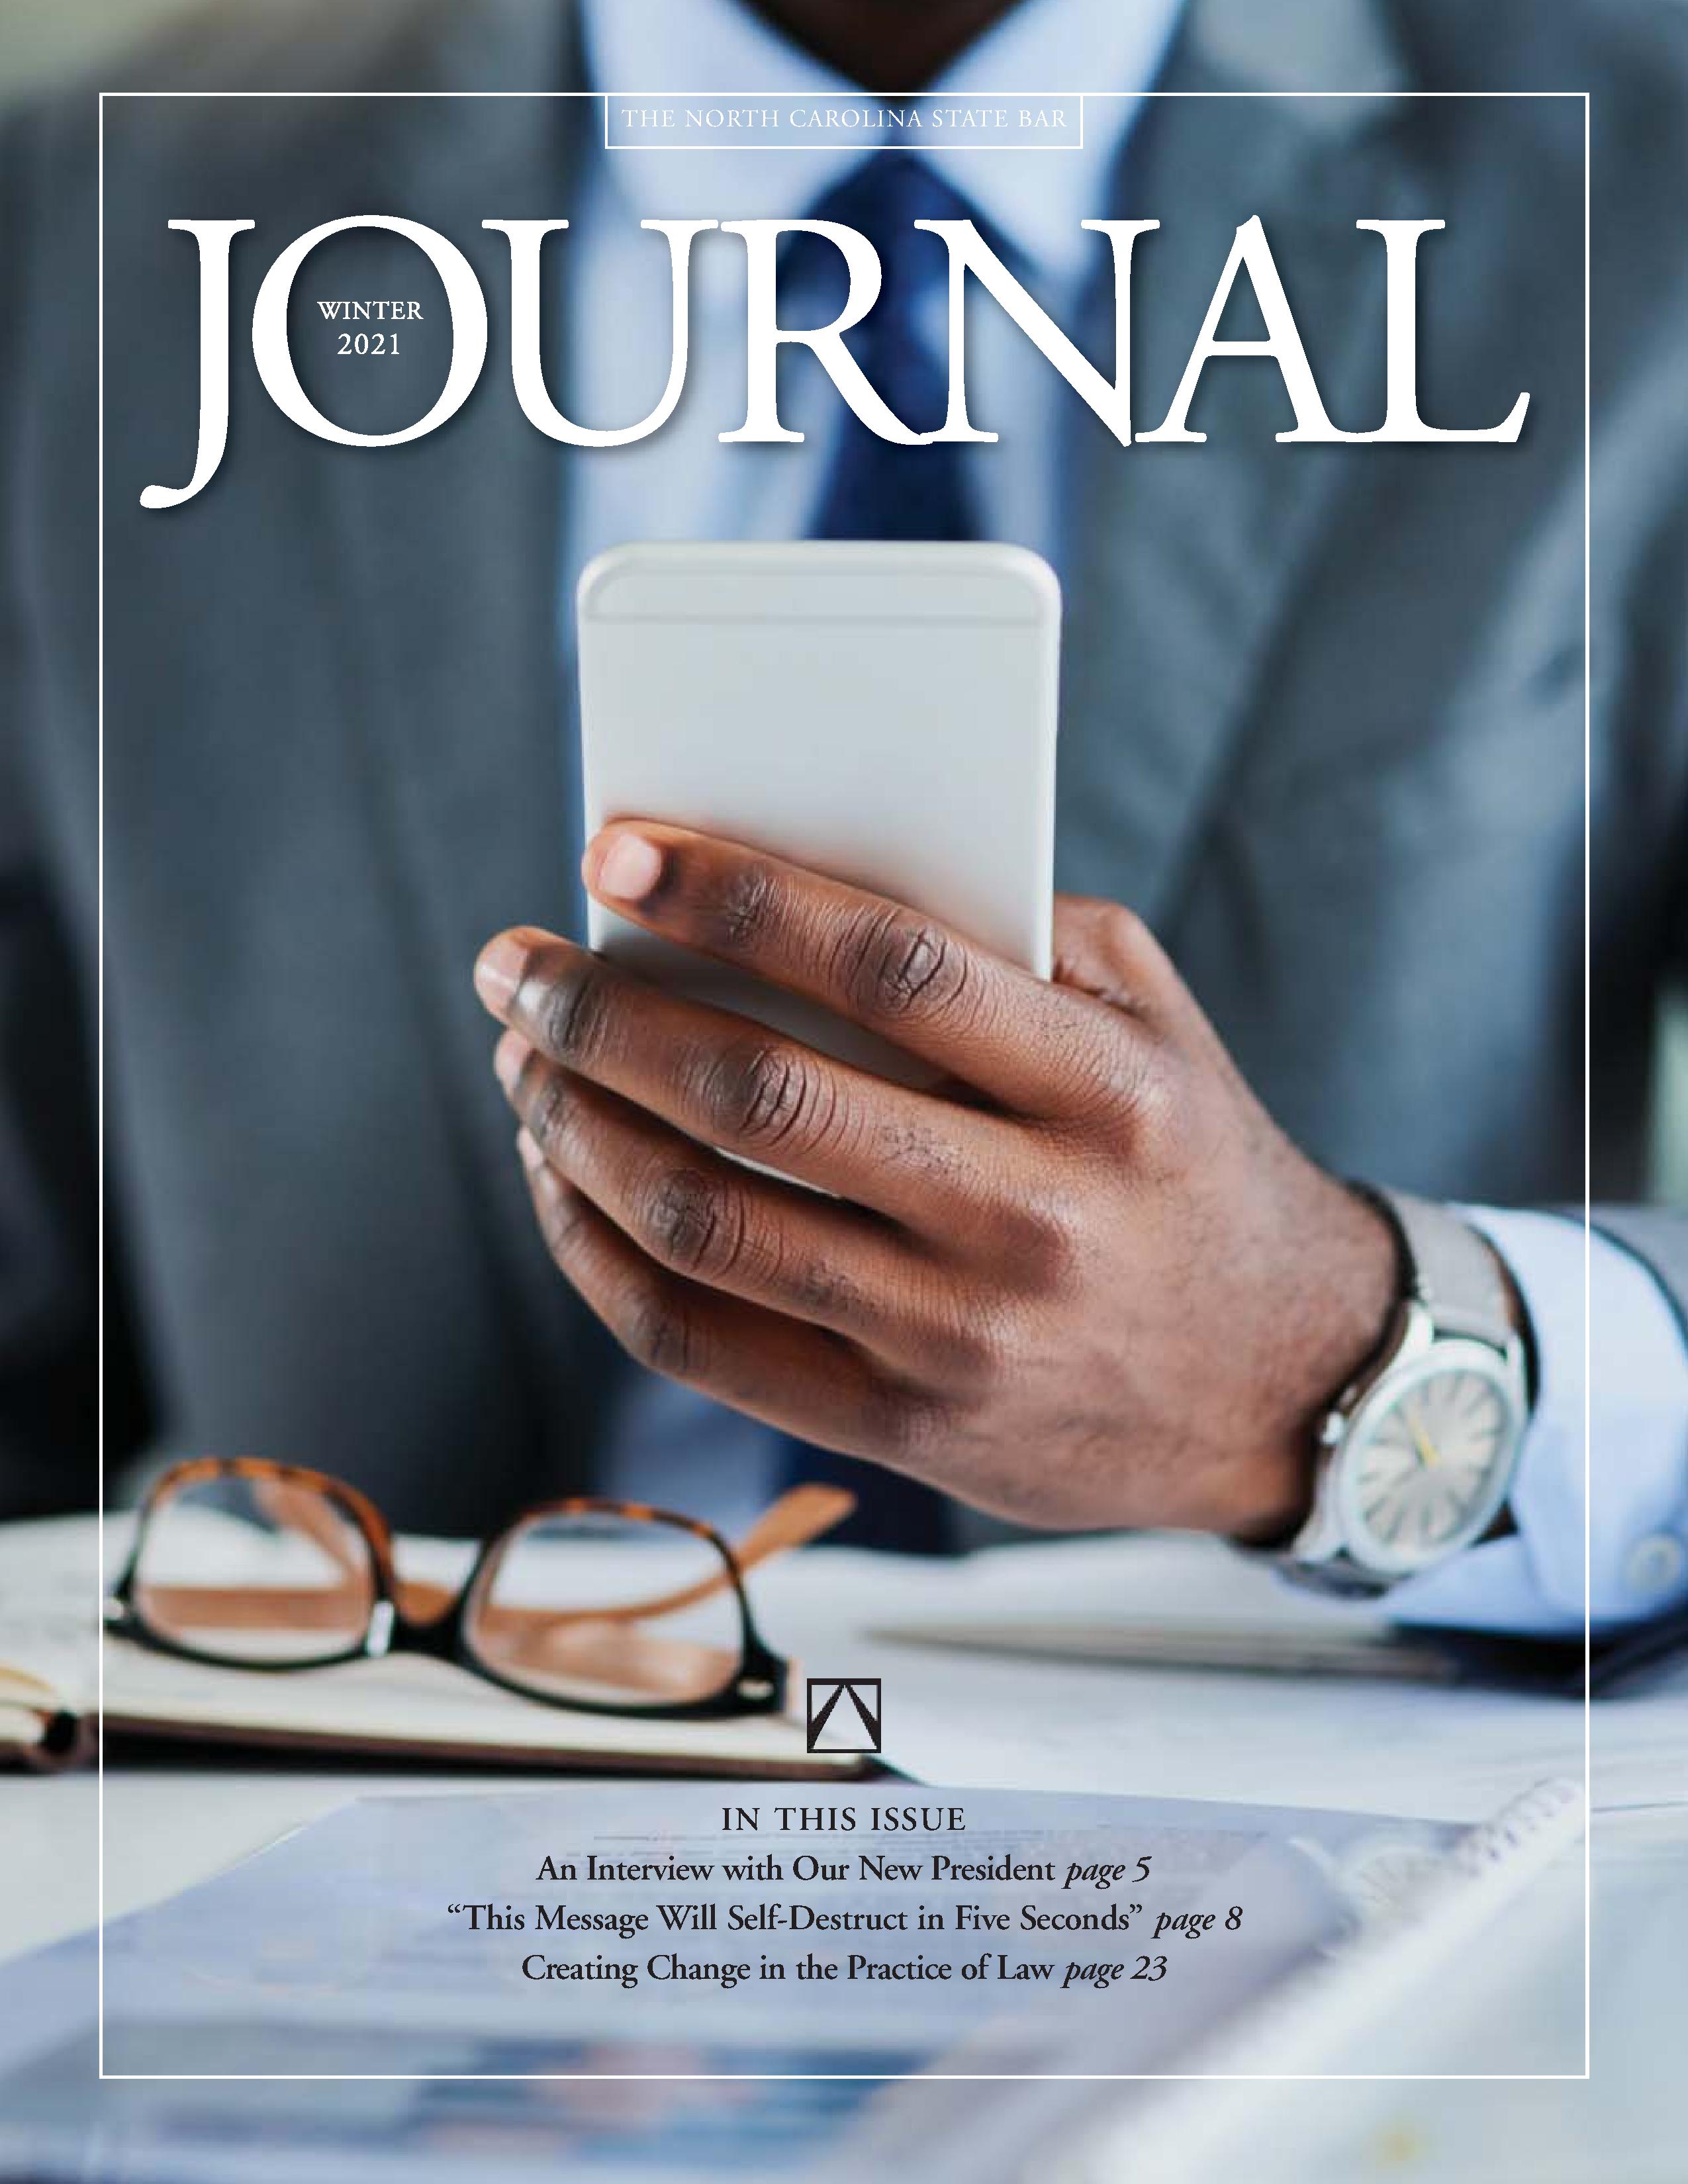 Winter 2021 Edition of the North Carolina State Bar Journal